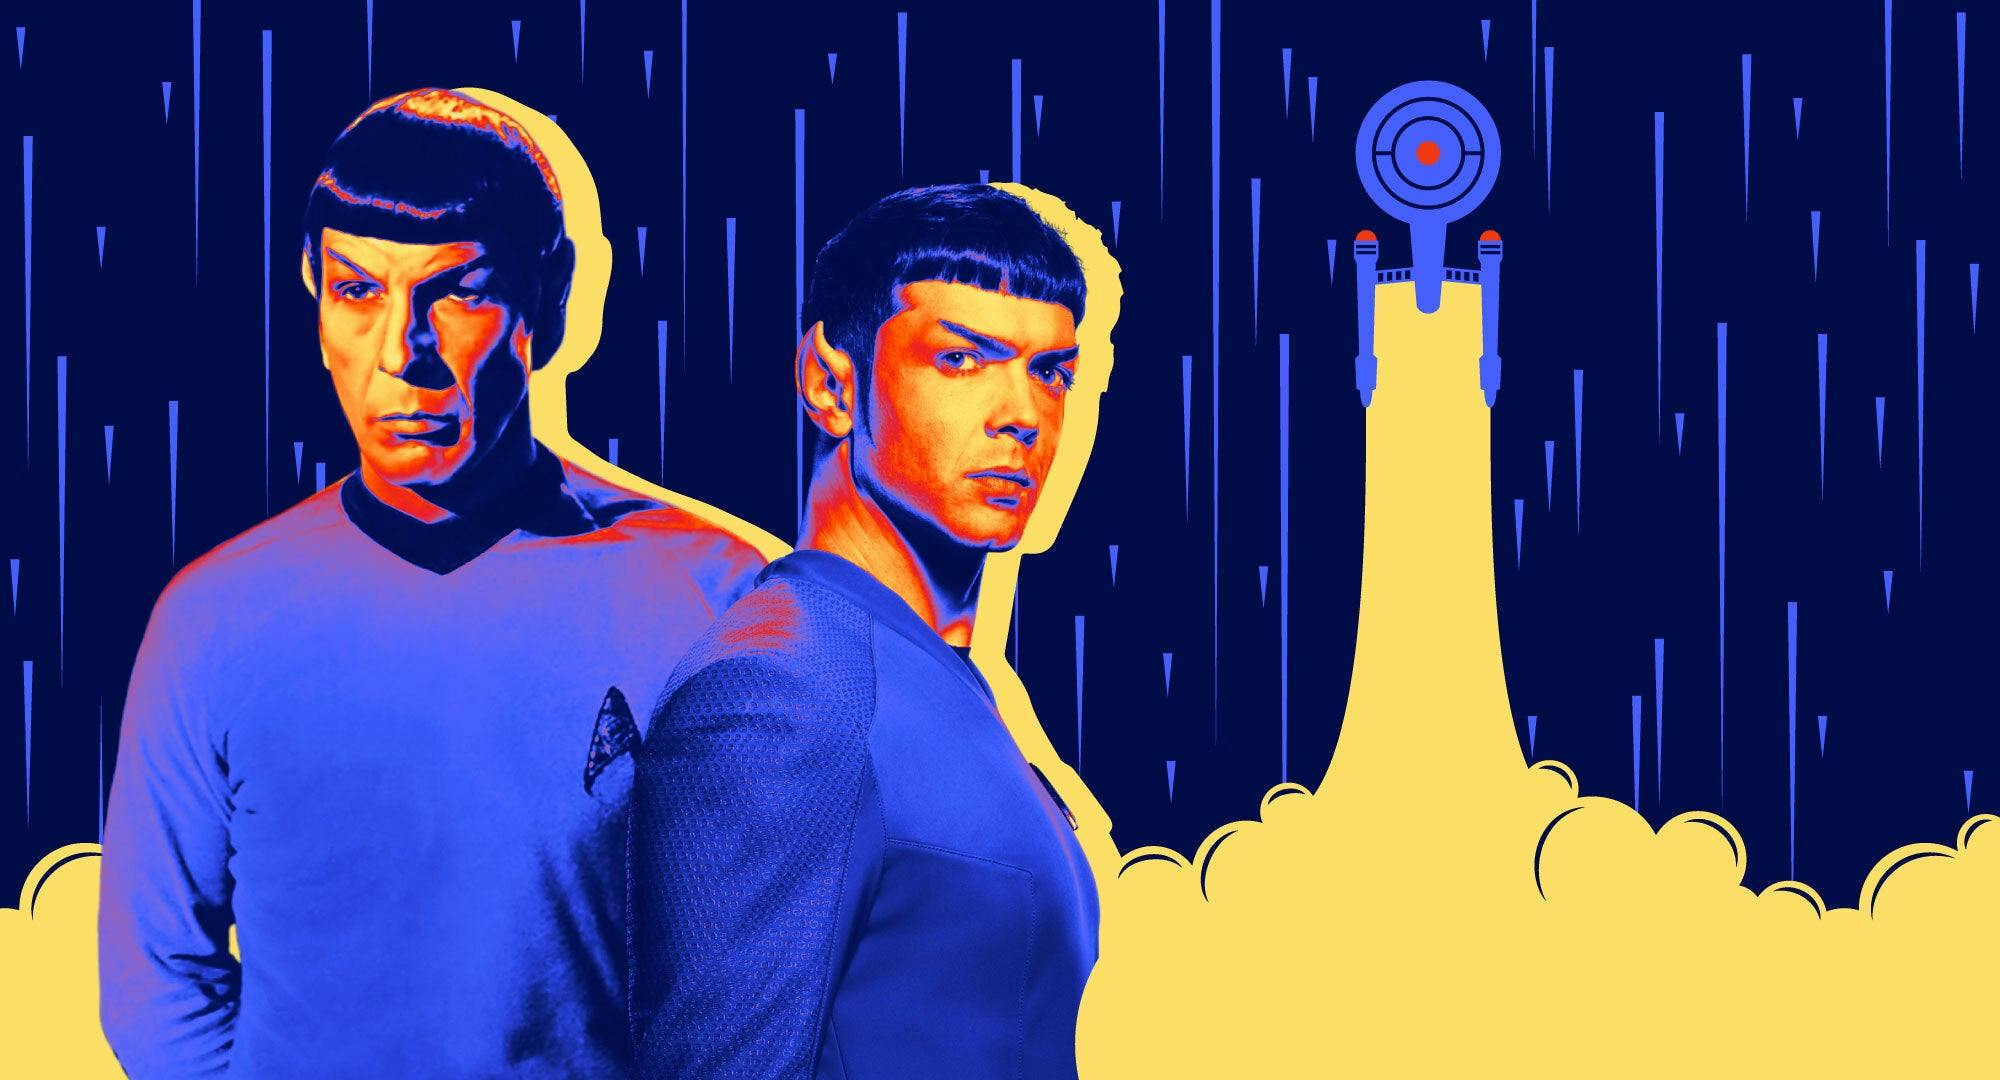 Illustrated art featuring the U.S.S. Enterprise warping as well as Leonard Nimoy and Ethan Peck as Spock